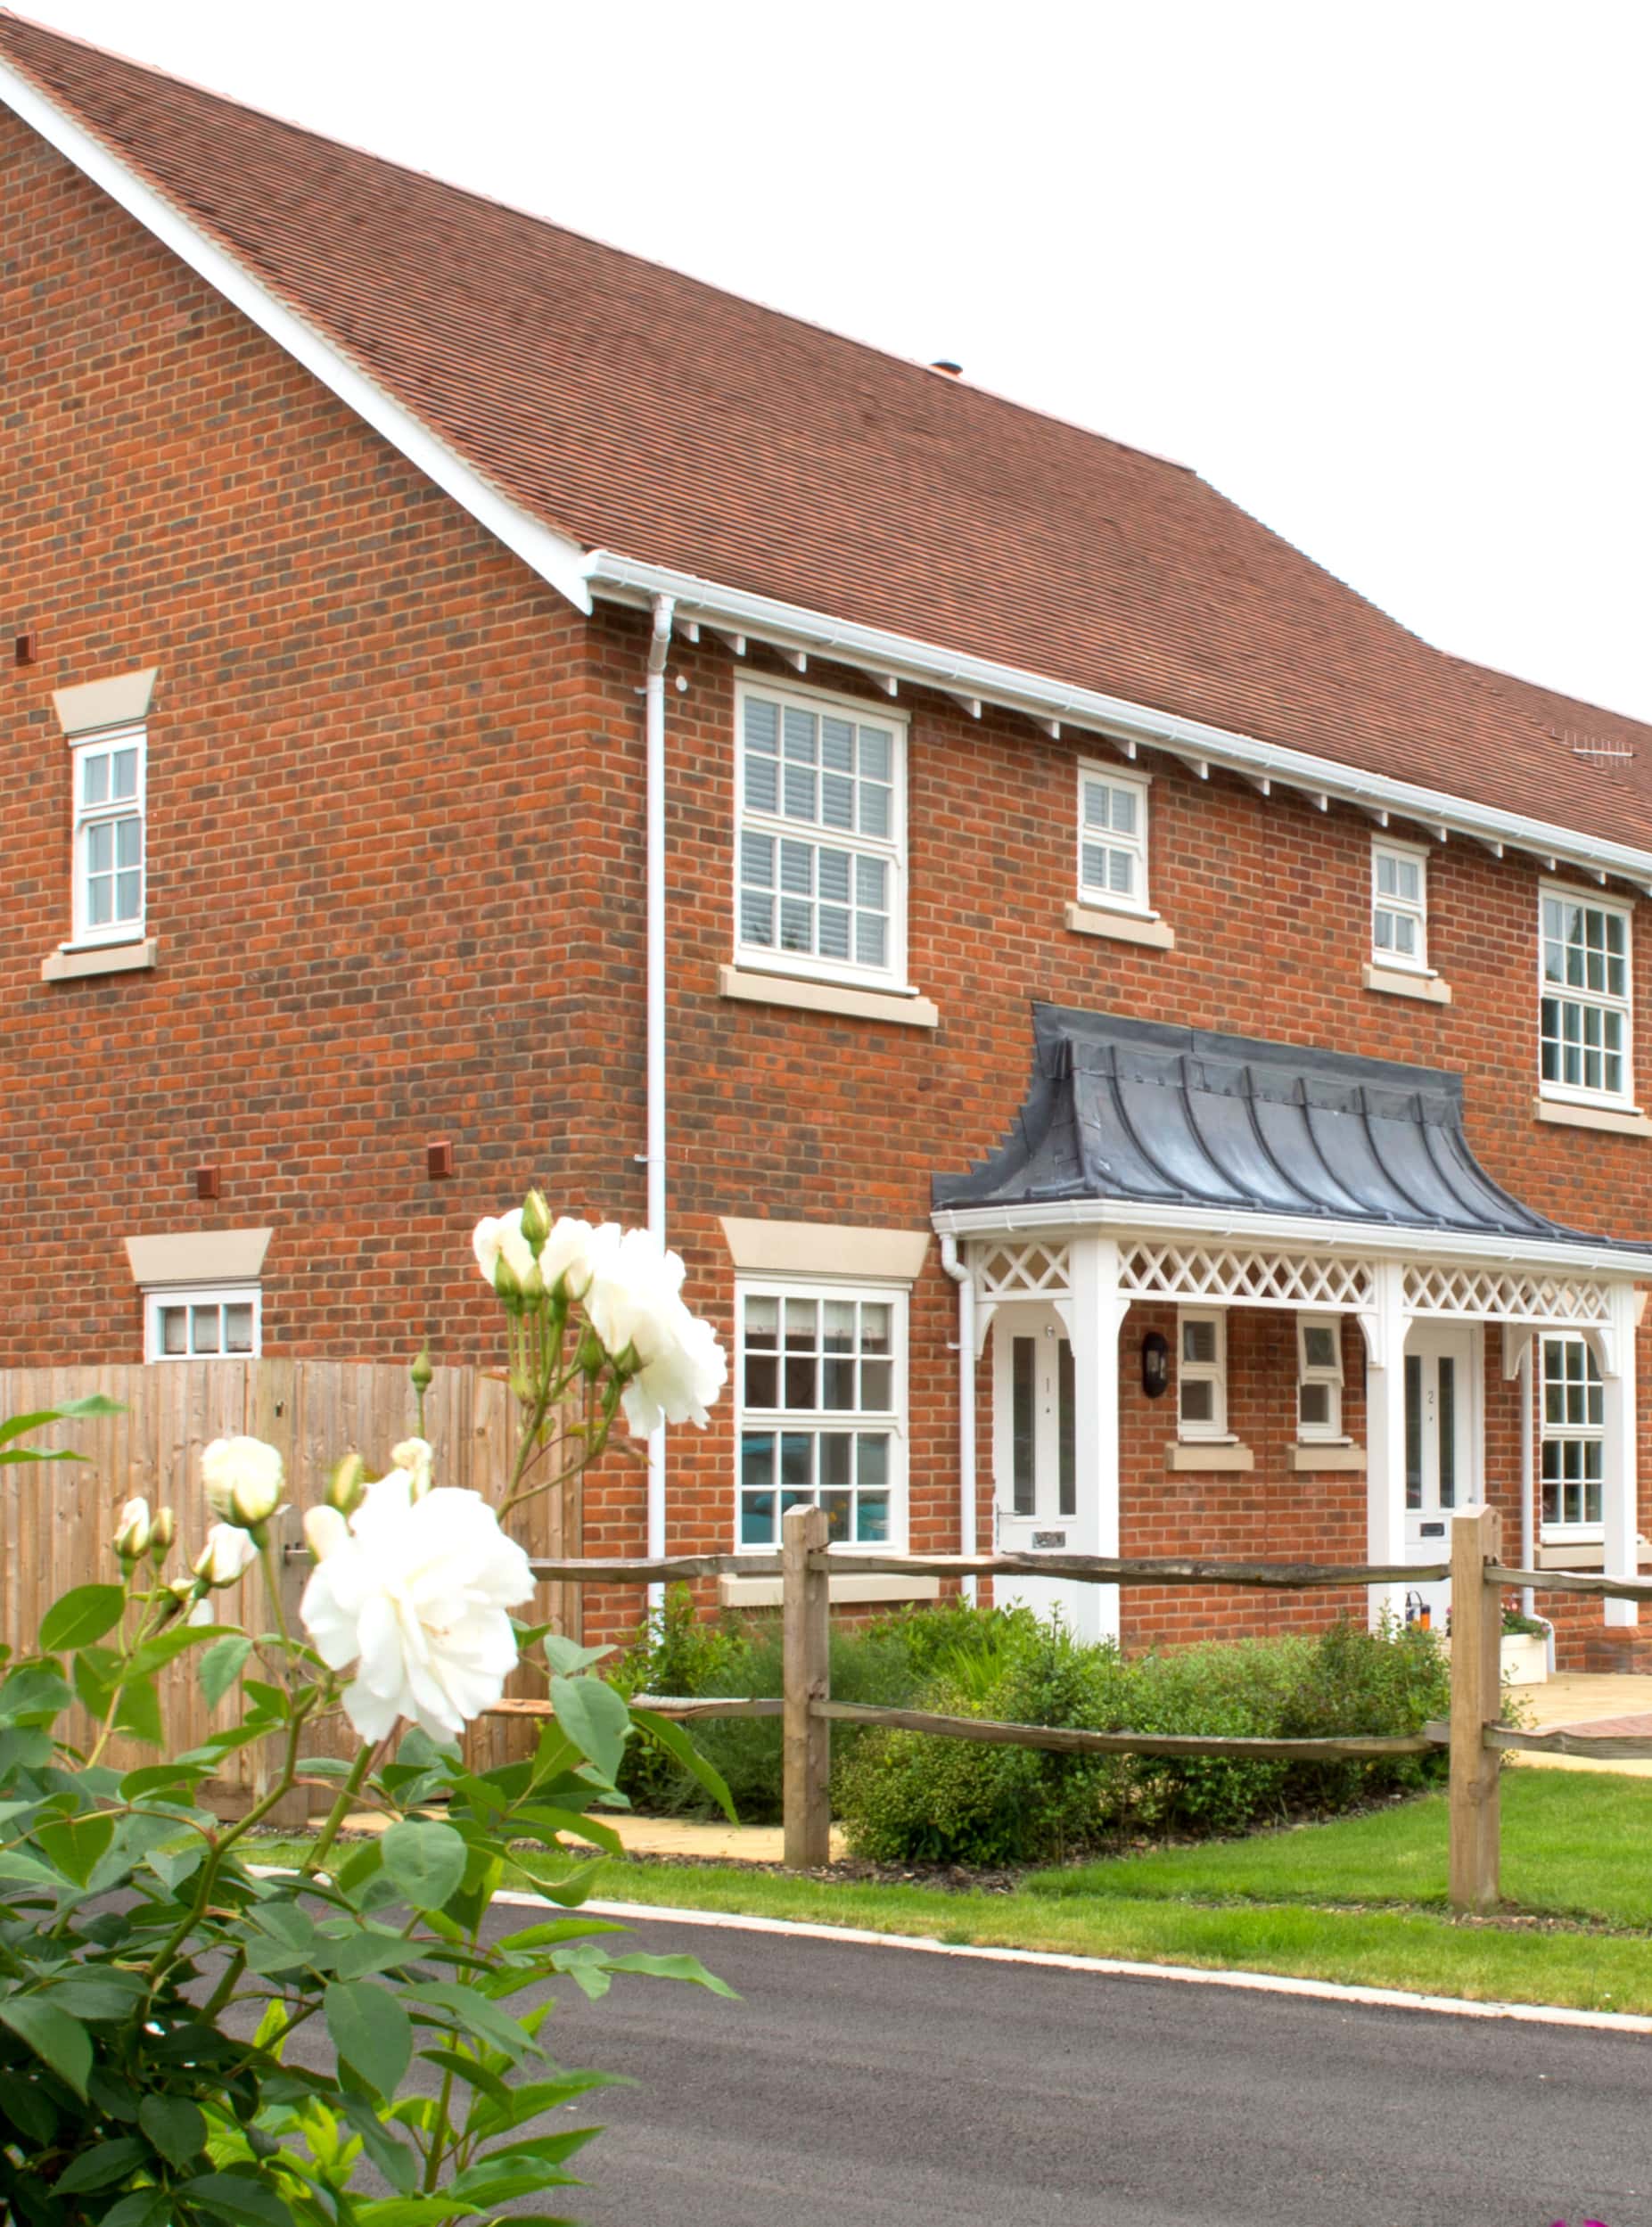 Bewley Homes, Winchester